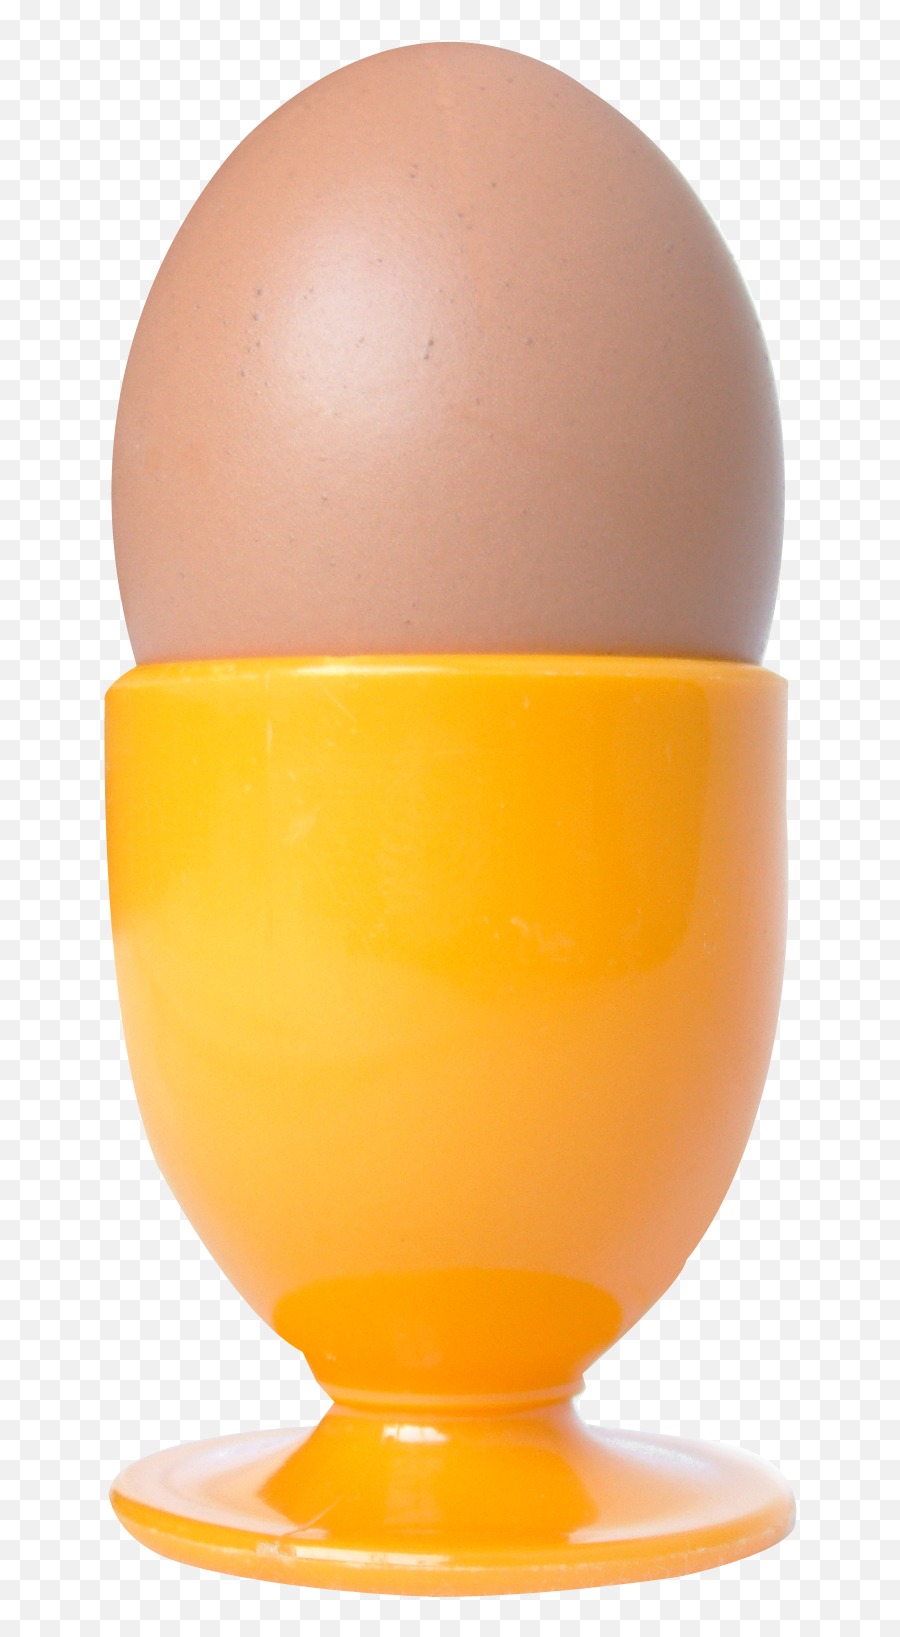 Egg Png And Vectors For Free Download - Dlpngcom Egg Cup Png,Cracked Egg Png